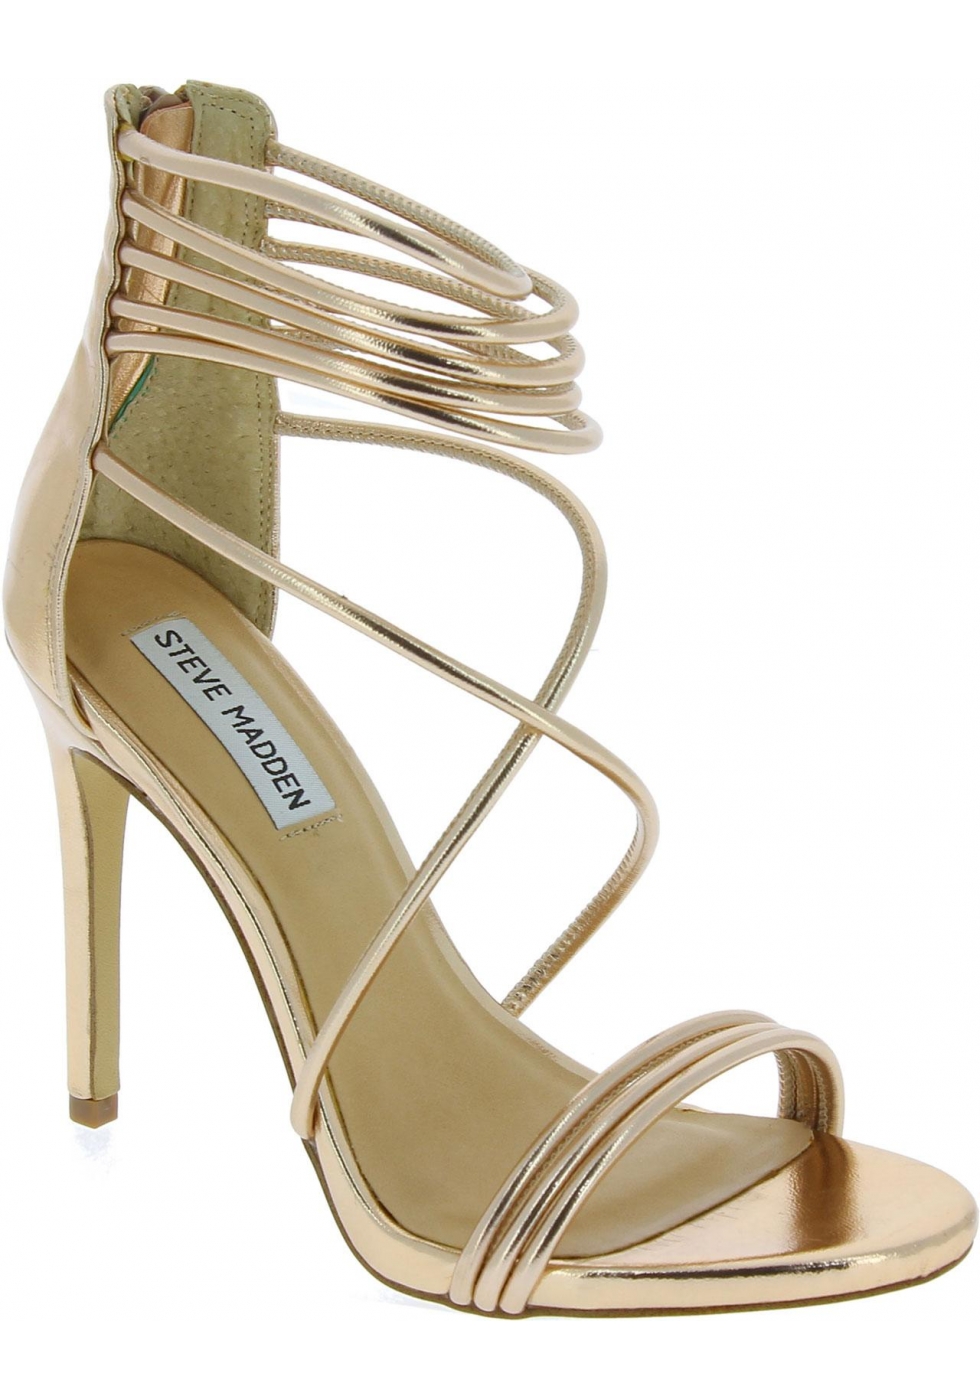 usted está evolución asignar Steve Madden Women's high stiletto sandals with zip in gold faux leather -  Italian Boutique